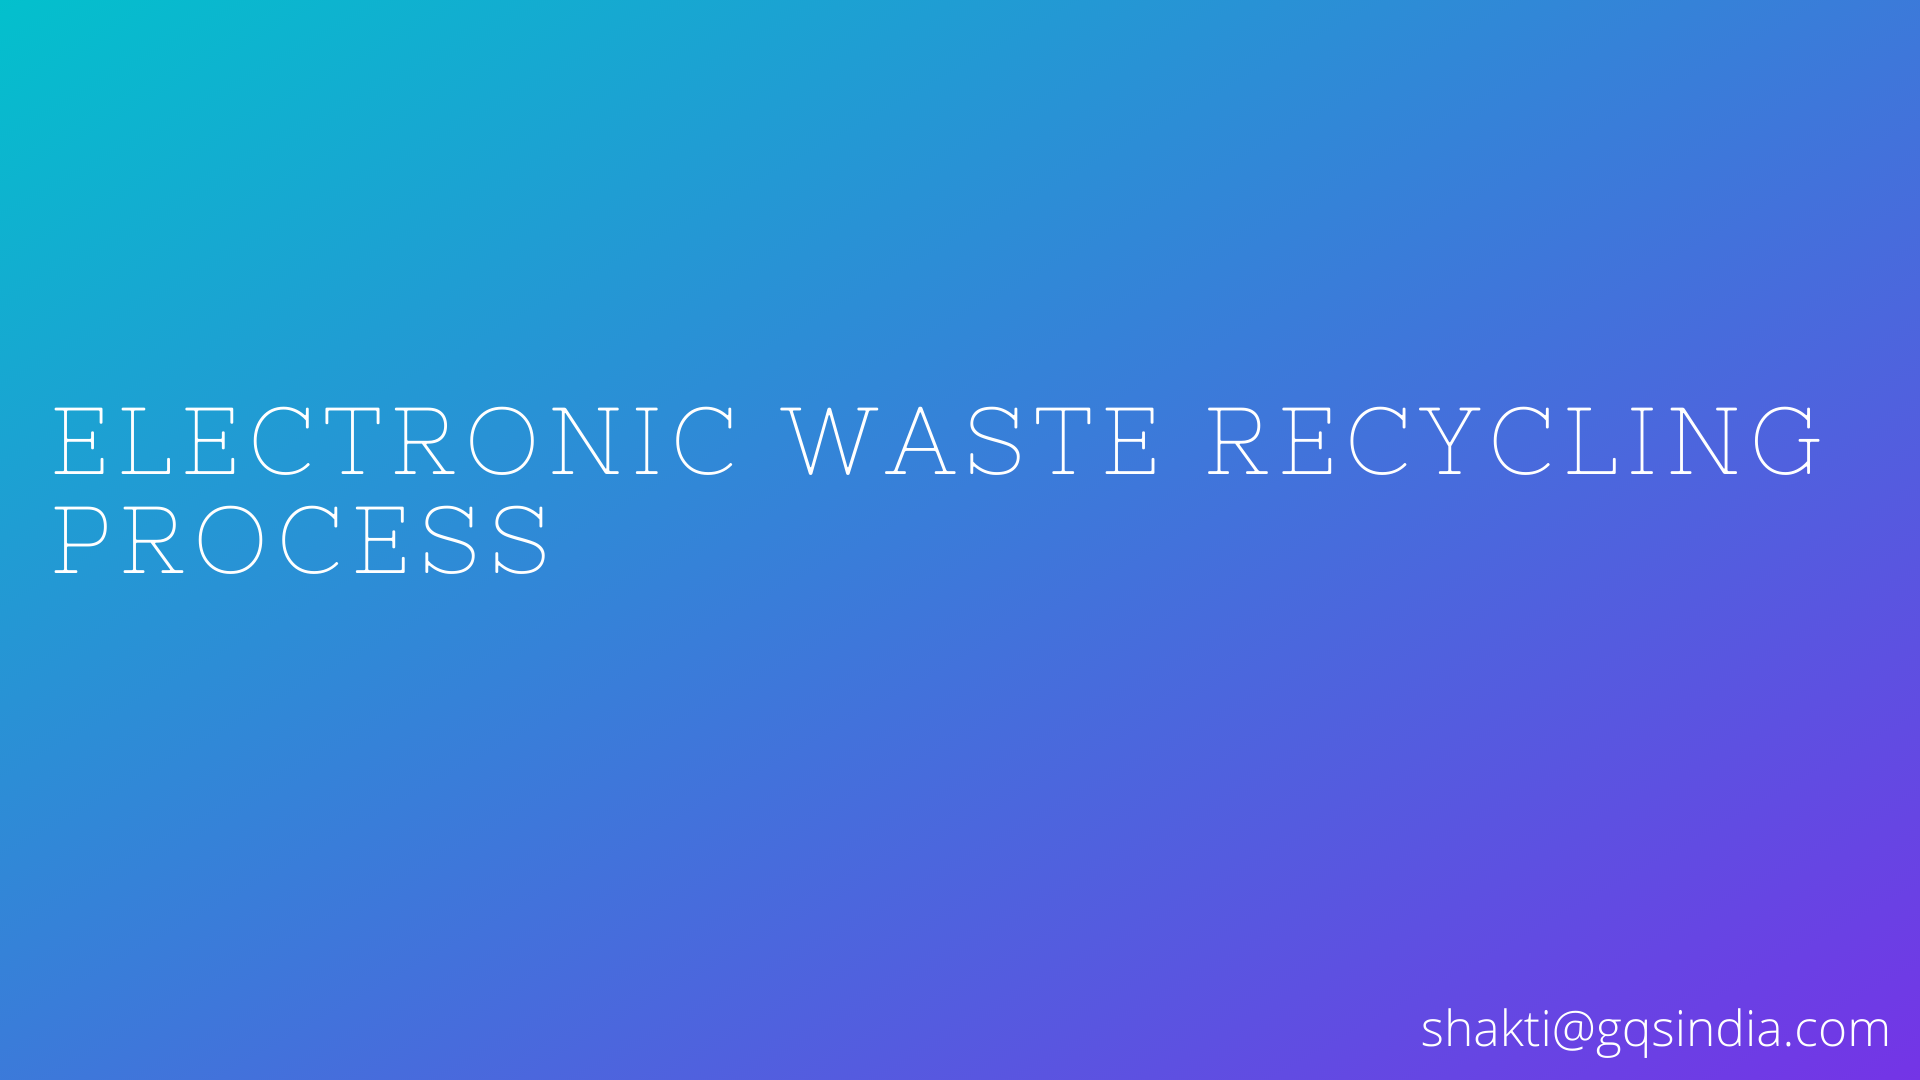 ELECTRONIC WASTE RECYCLING PROCESS